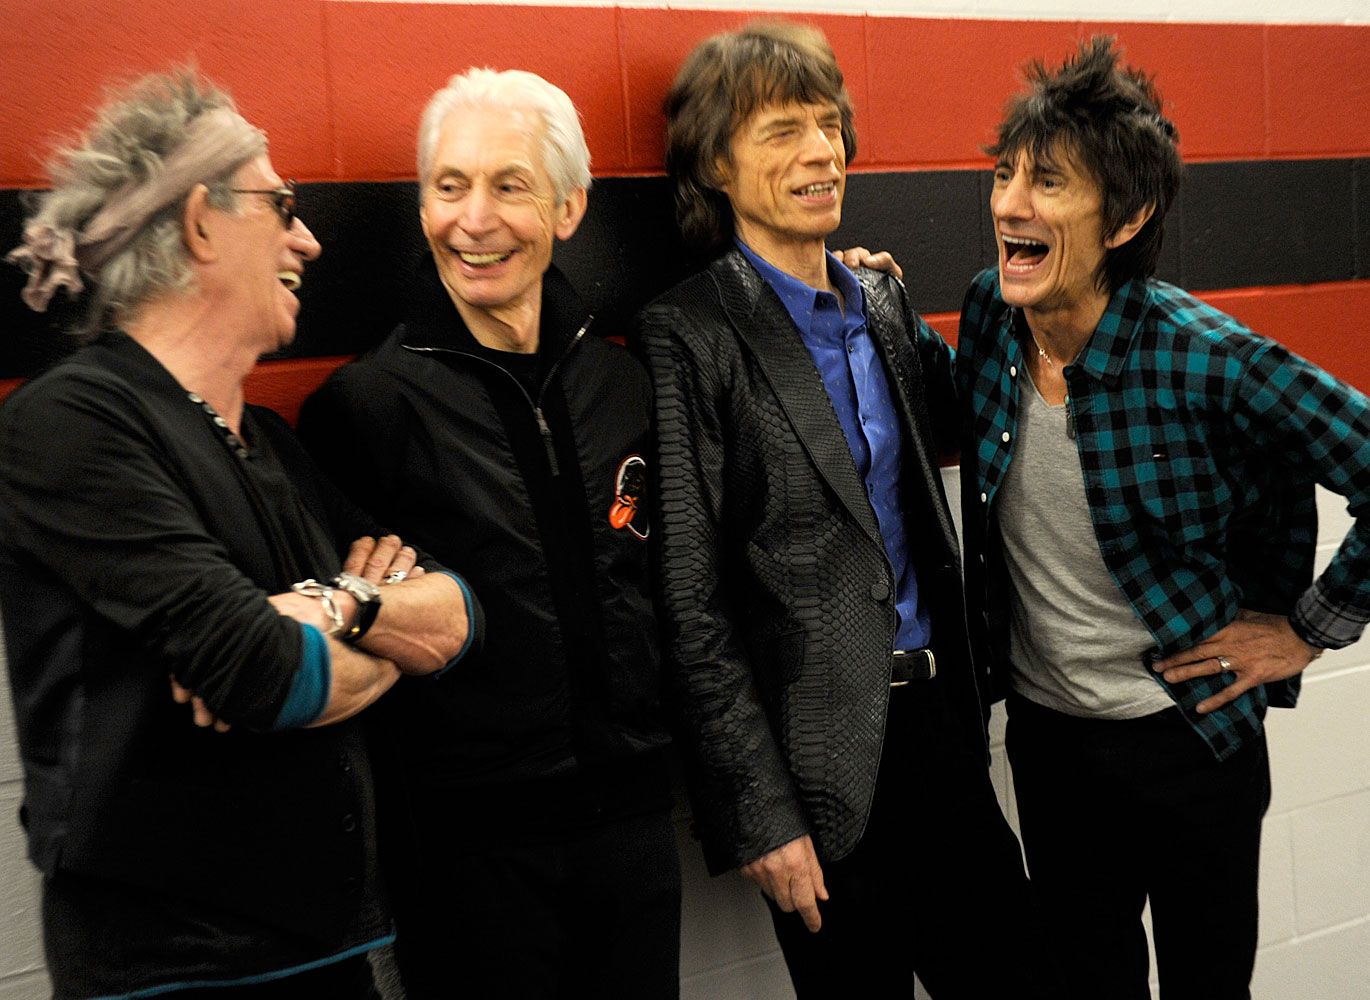 Keith Richards, Charlie Watts, Mick Jagger, and Ronnie Wood.